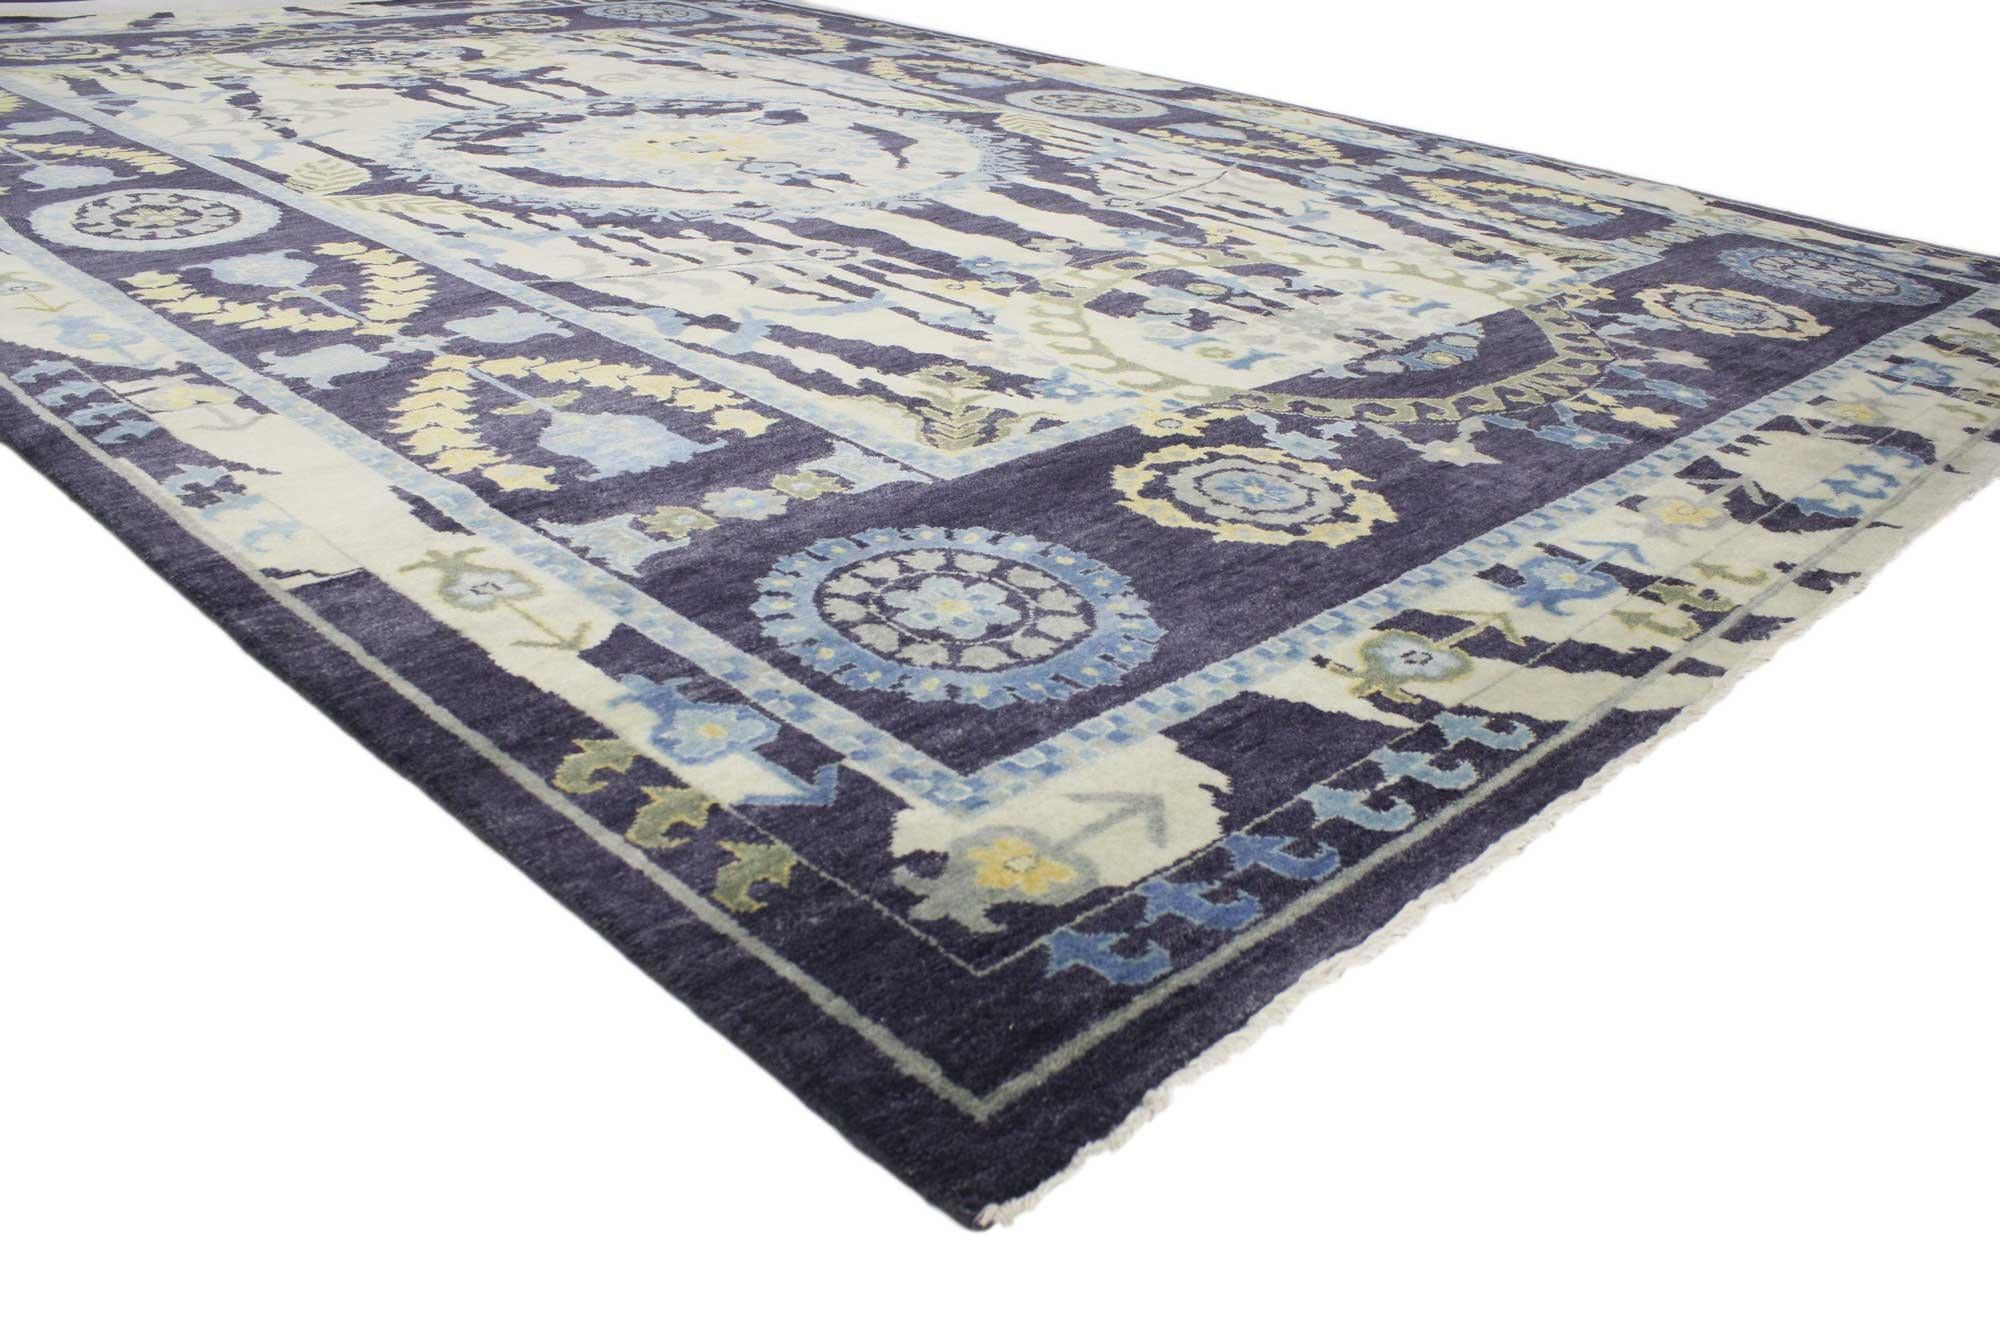 30349 new transitional area rug, 09'07 x 13'10.
With its transitional style, incredible detail and texture, this hand knotted wool transitional area rug is a captivating vision of woven beauty. The eye-catching Suzani design and beautiful blue hues